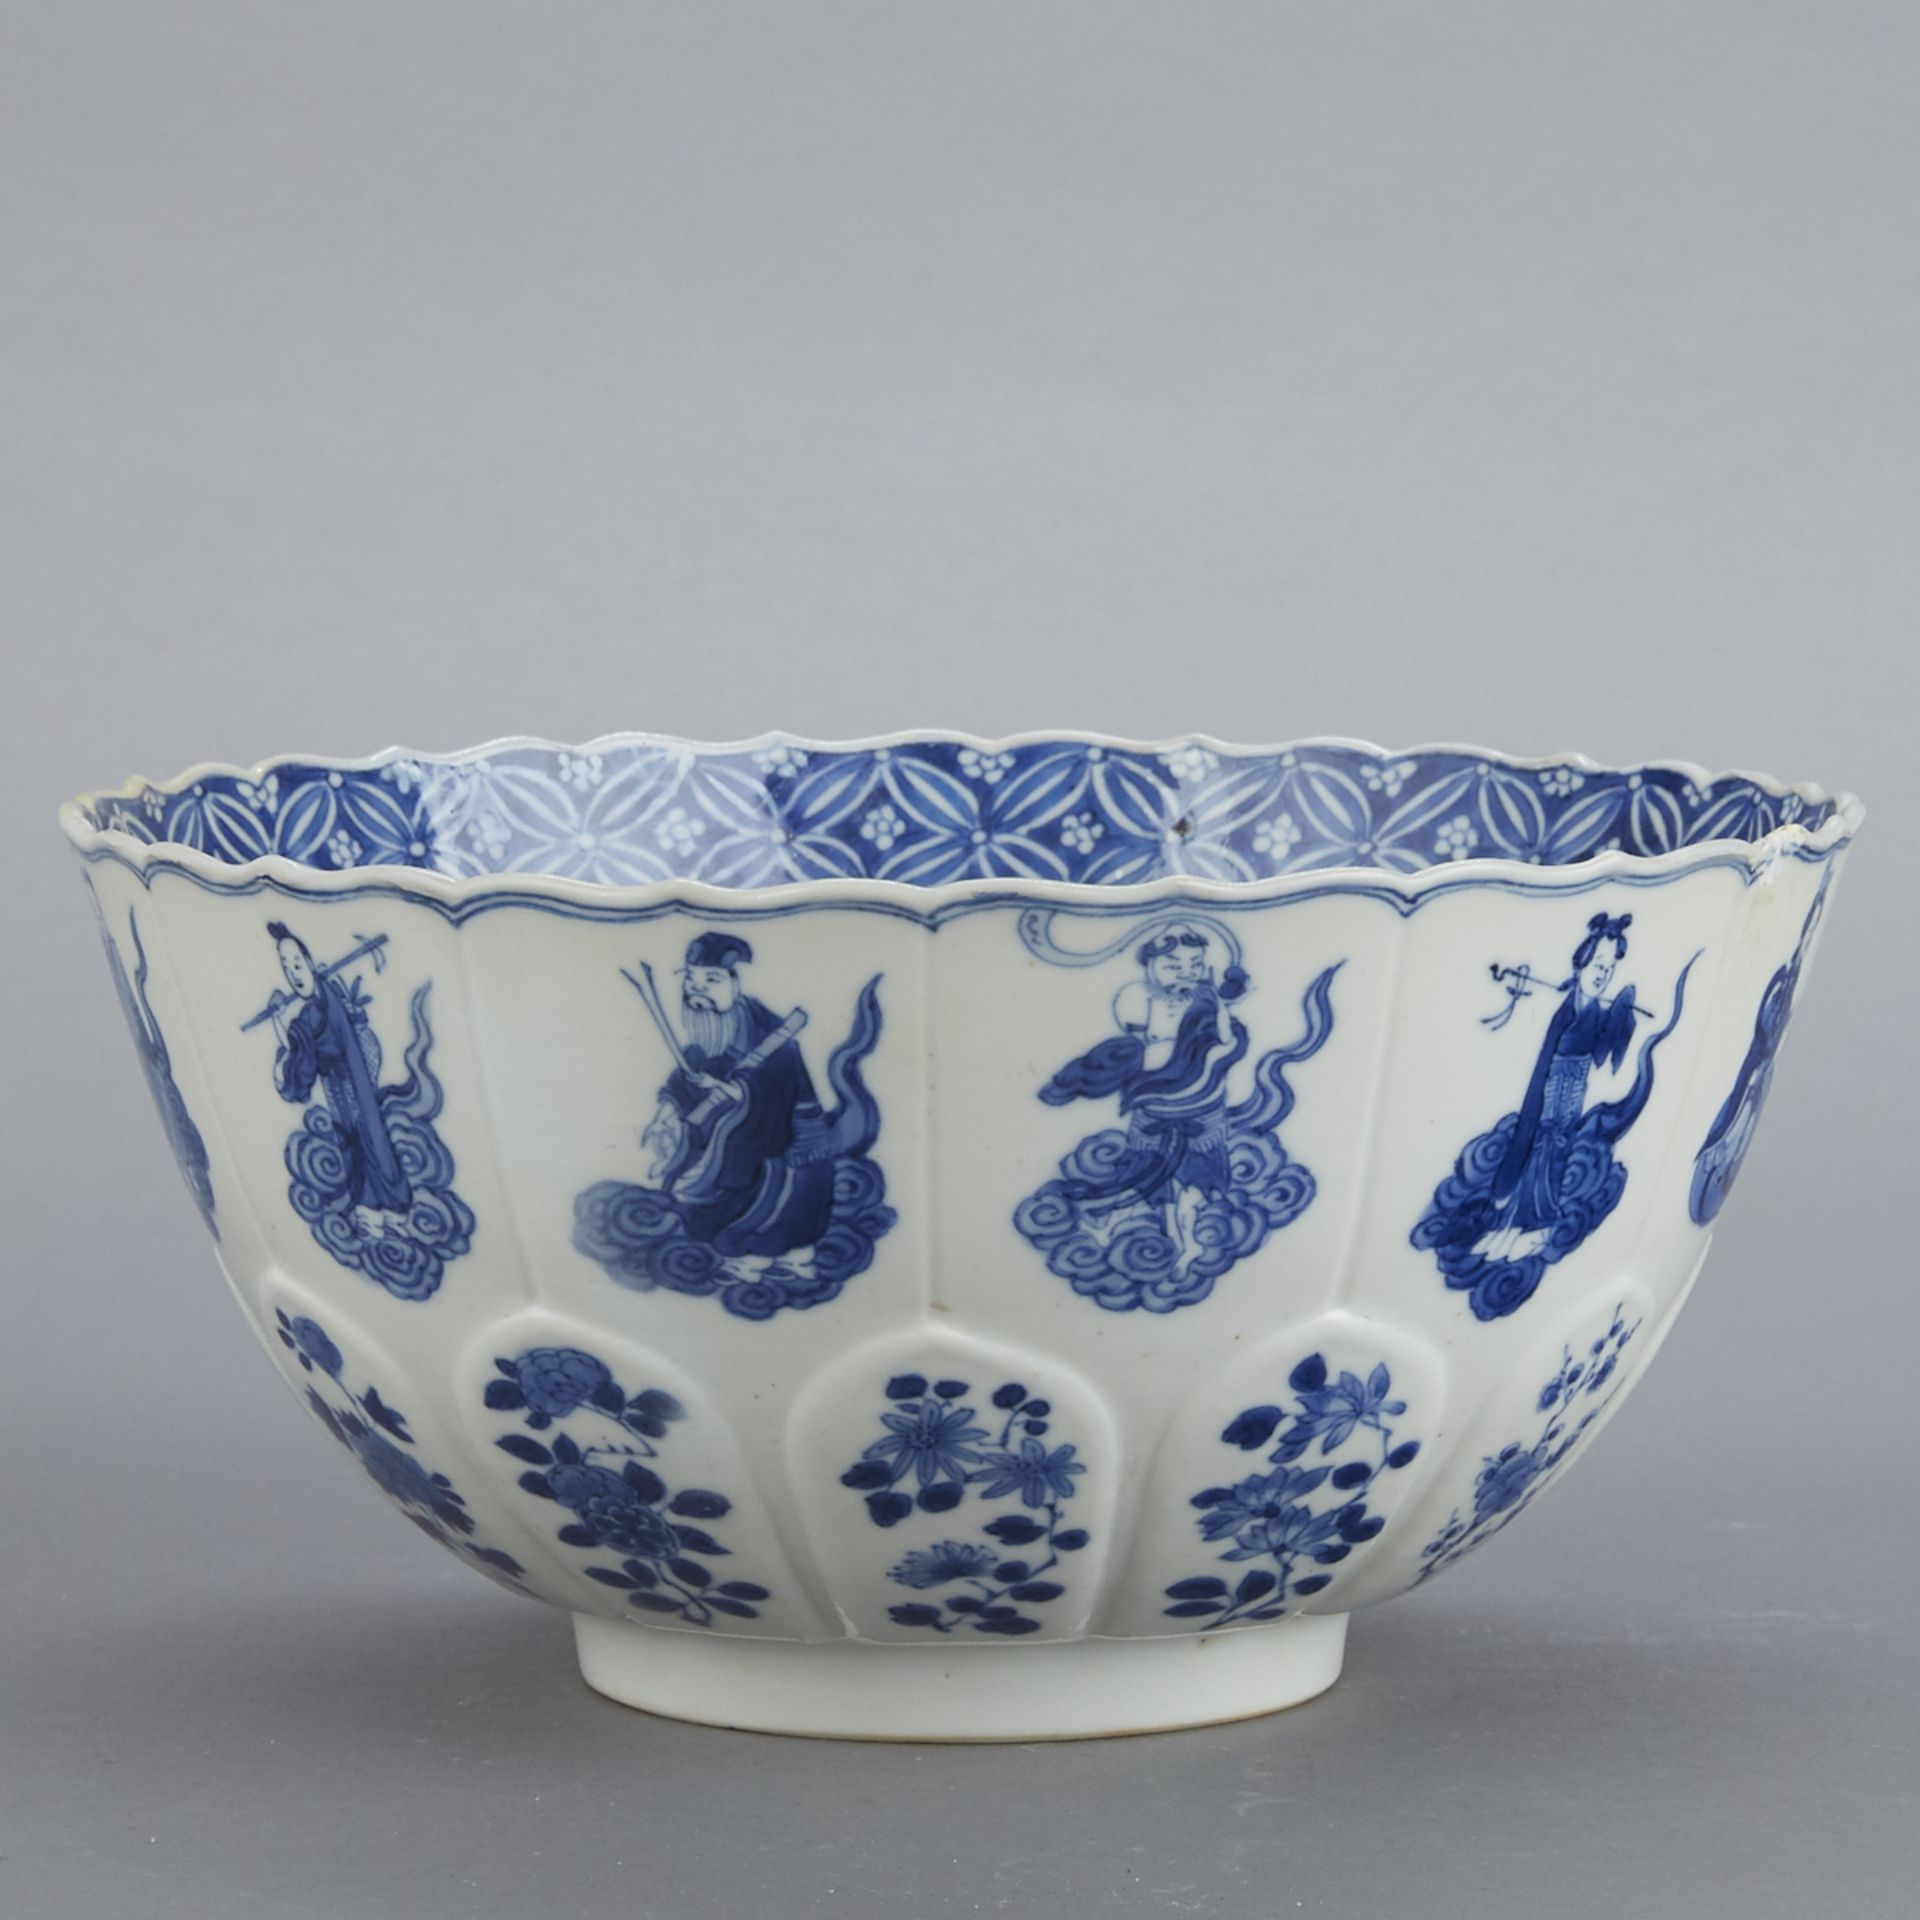 Chinese Xianfeng Blue & White Porcelain Bowl - Mark Period - Image 6 of 7